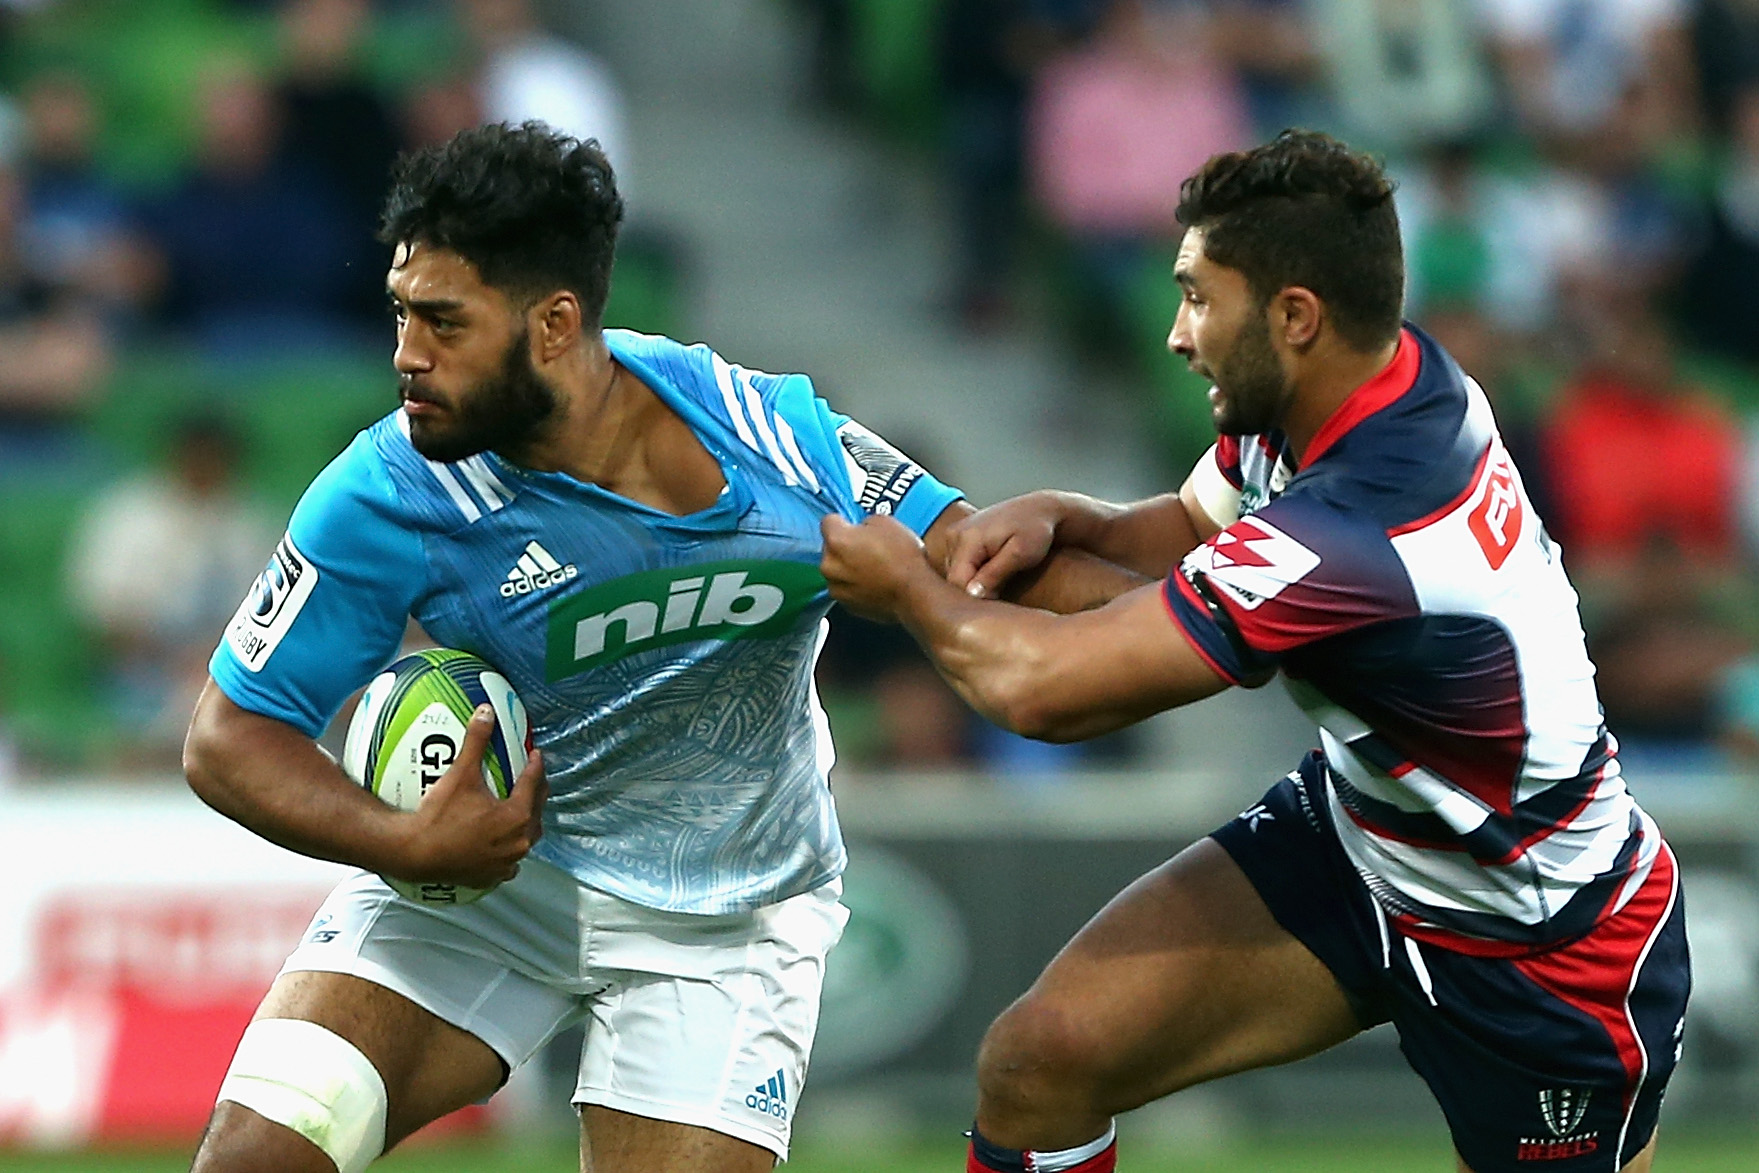 Where in the world can you see a Sky Super Rugby Trans-Tasman?  “Superrugby.co.nz